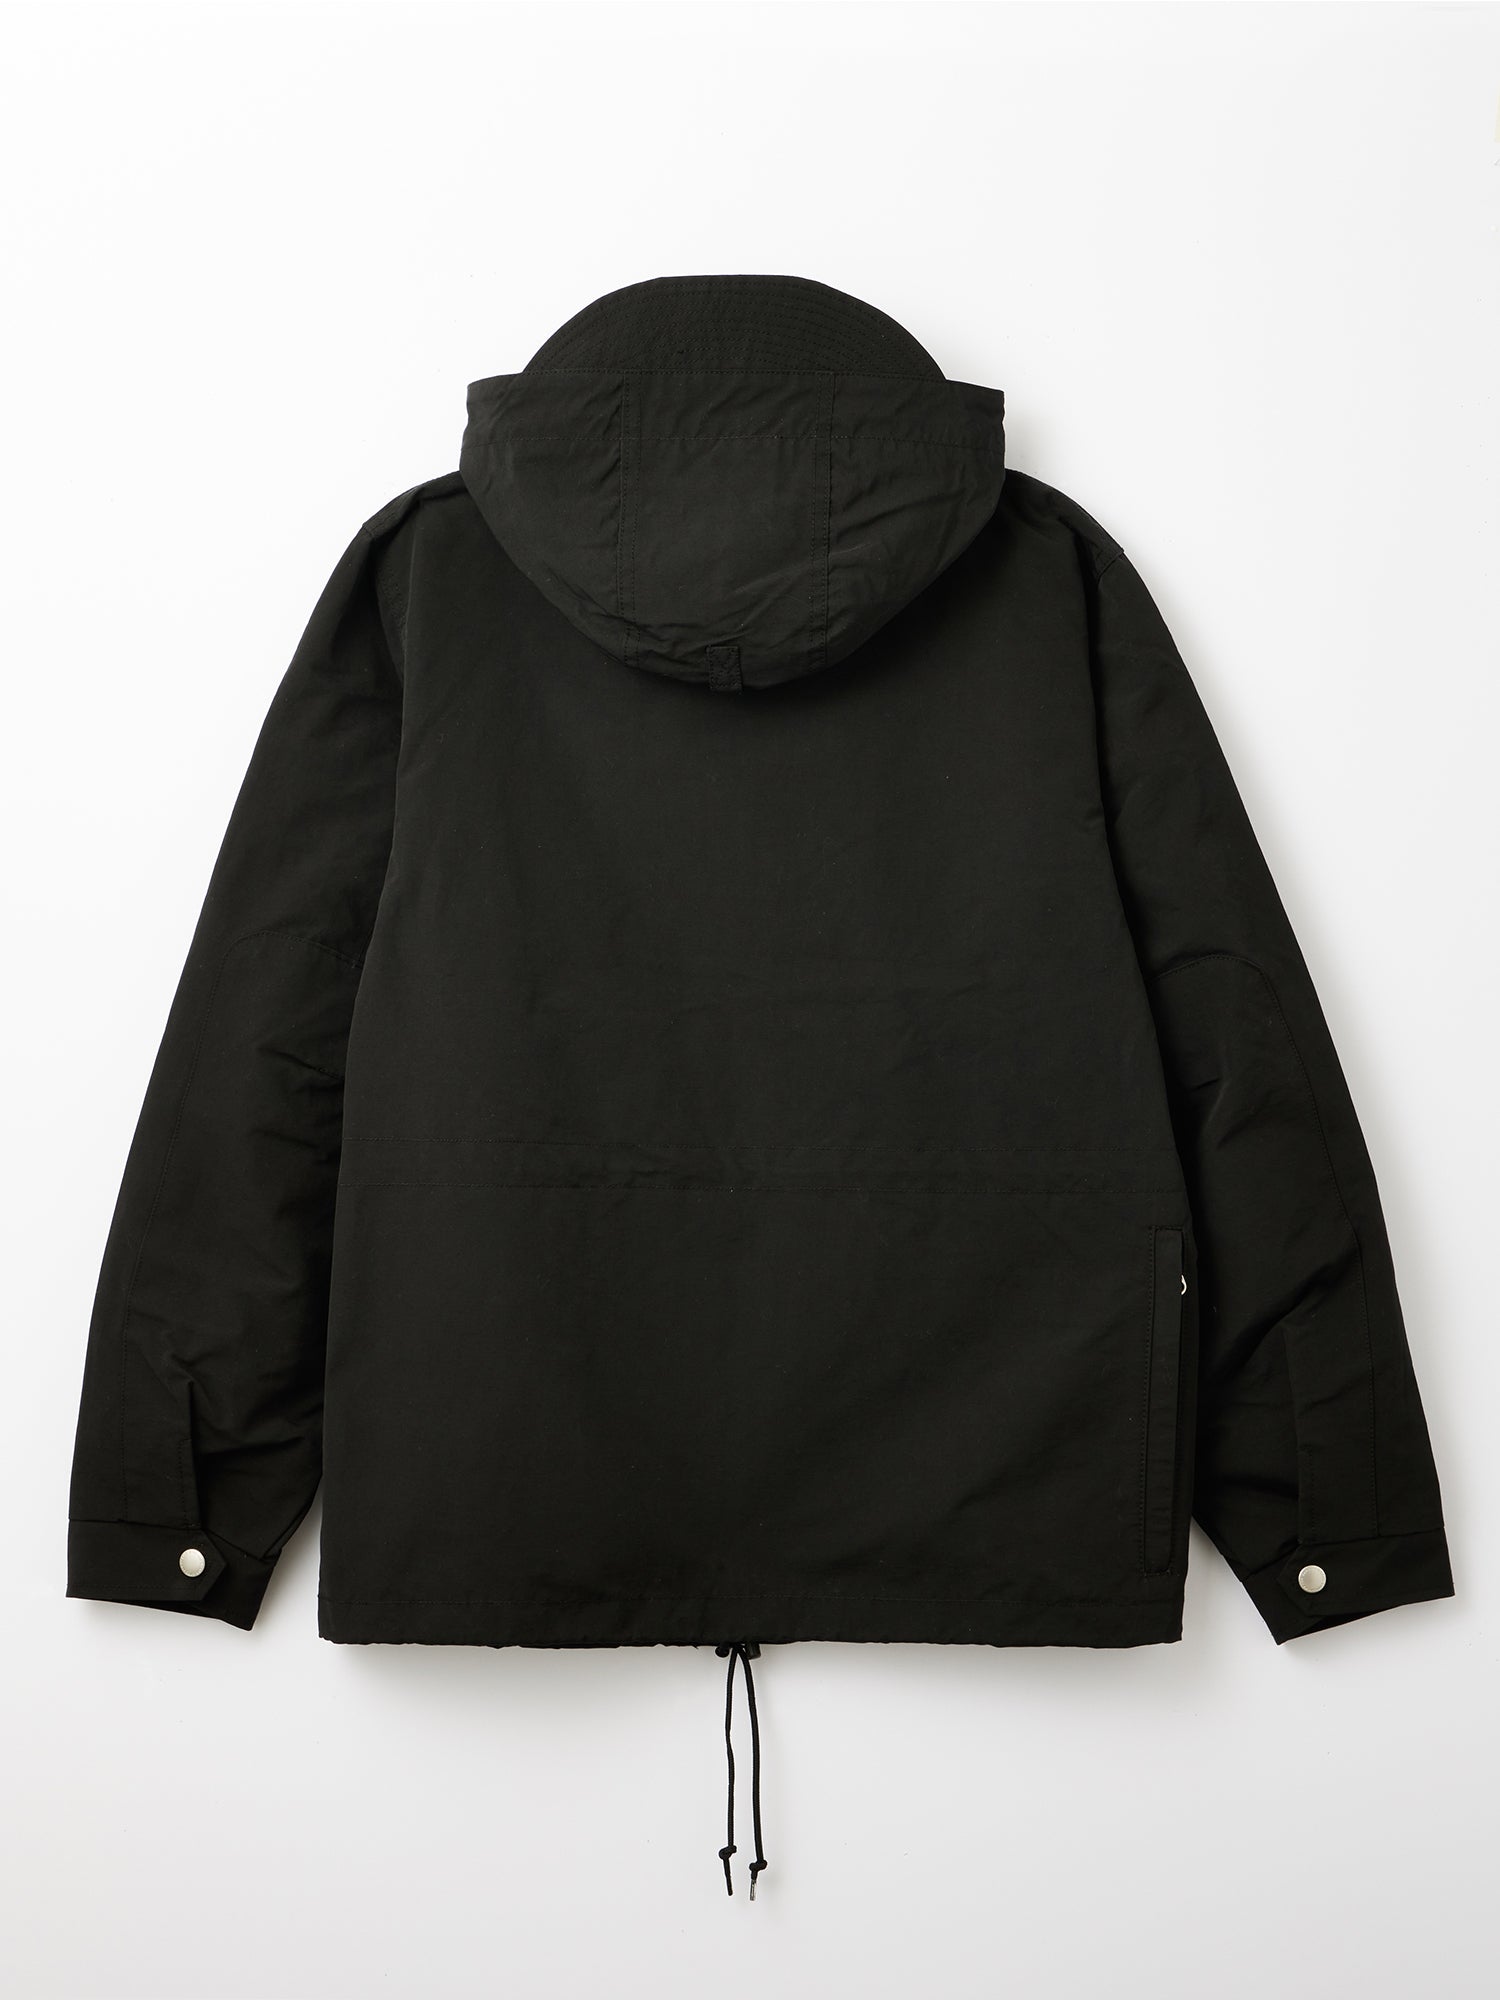 ENDS and MEANS Sanpo Jacket Black – CUXTON HOUSE